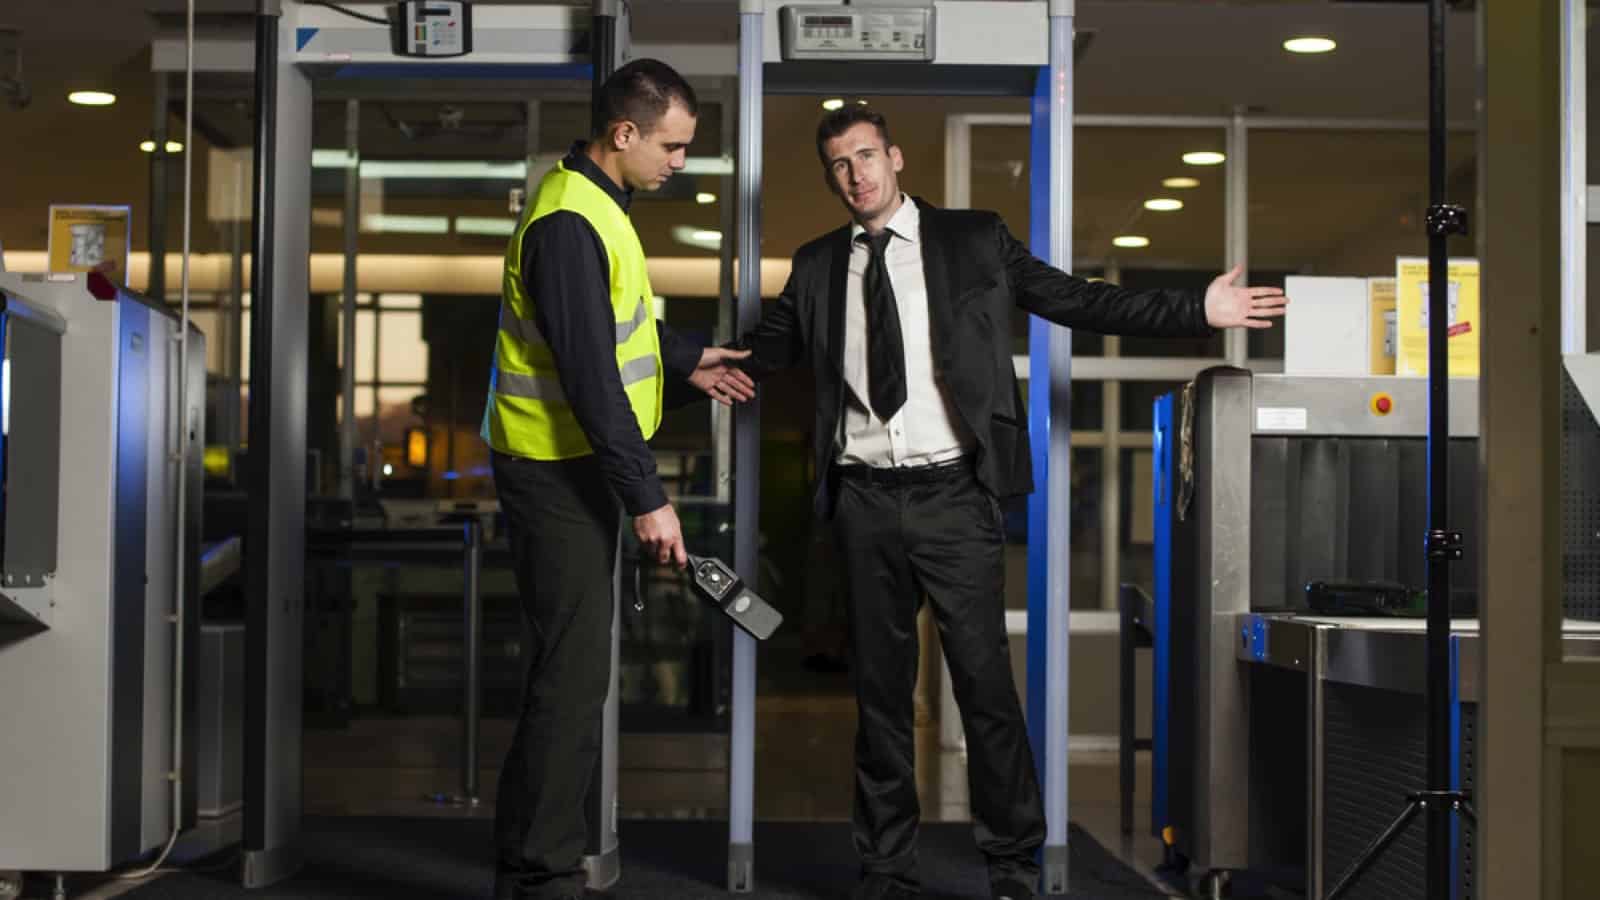 Security check in airport